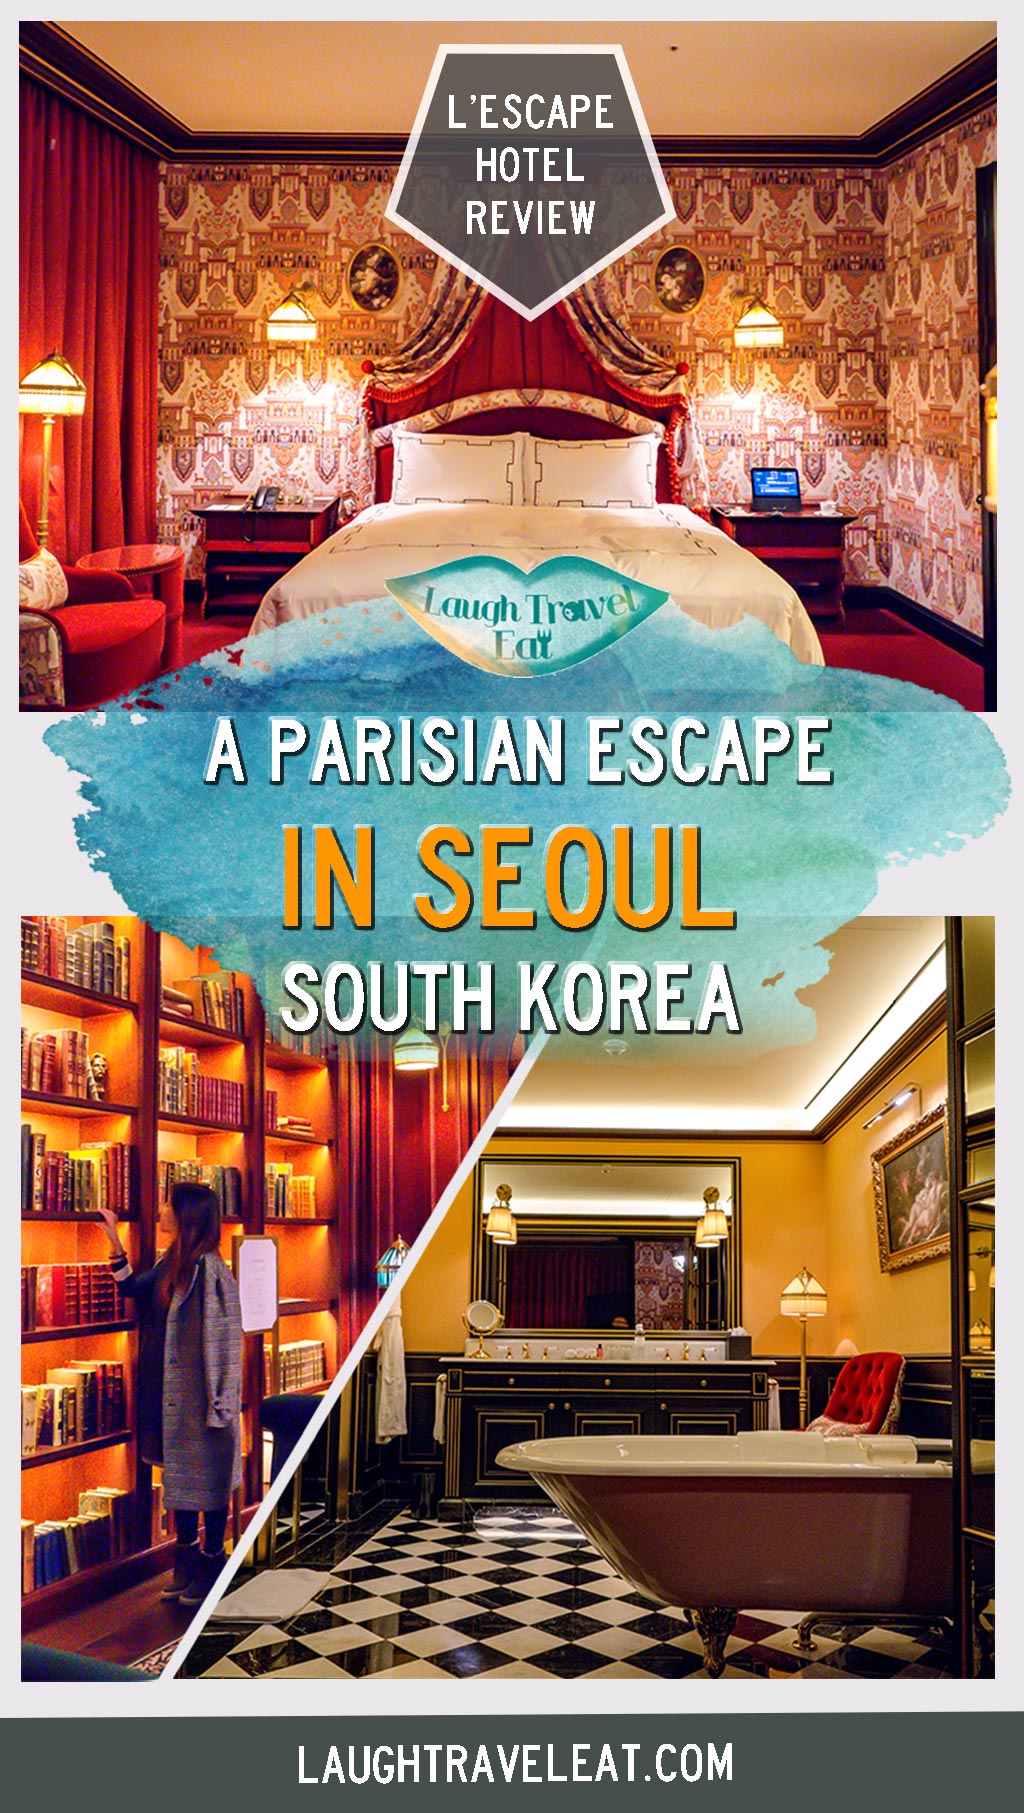 Ideally situated in Myeongdong, the L’Escape Hotel is a Parisian escape in Seoul. From the moment you step into the black-and-white tiles lobby, you are transported you to 19th century Paris in all its glory. Here's what is like to stay there: #Seoul #BoutiqueHotel #SouthKorea